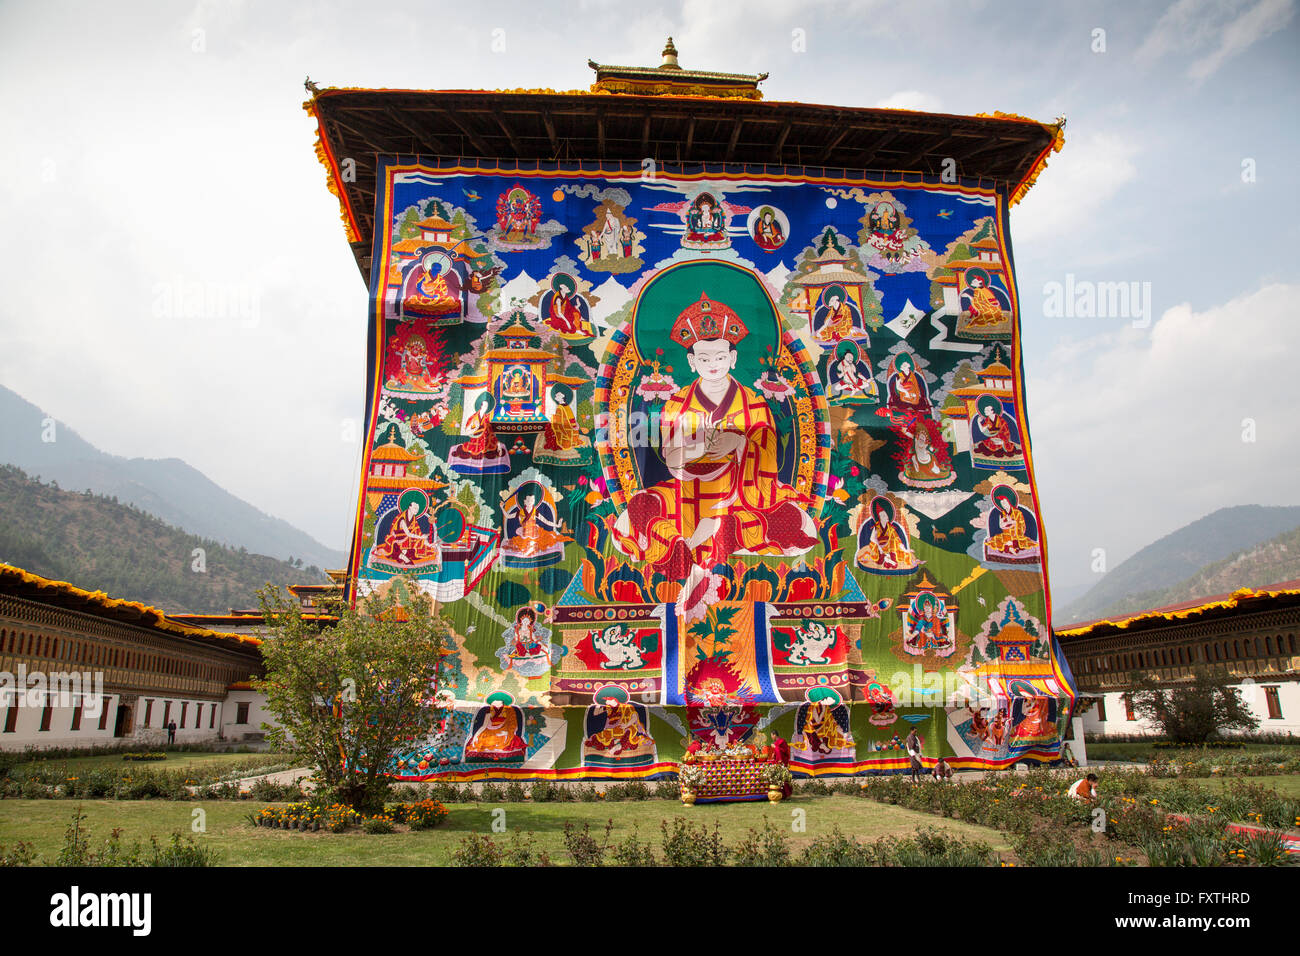 A giant tapestry depicting the history of Bhutan at Tashichhoedzong, a Buddhist monastery and fortress in the Capitol, Thimpu. Stock Photo